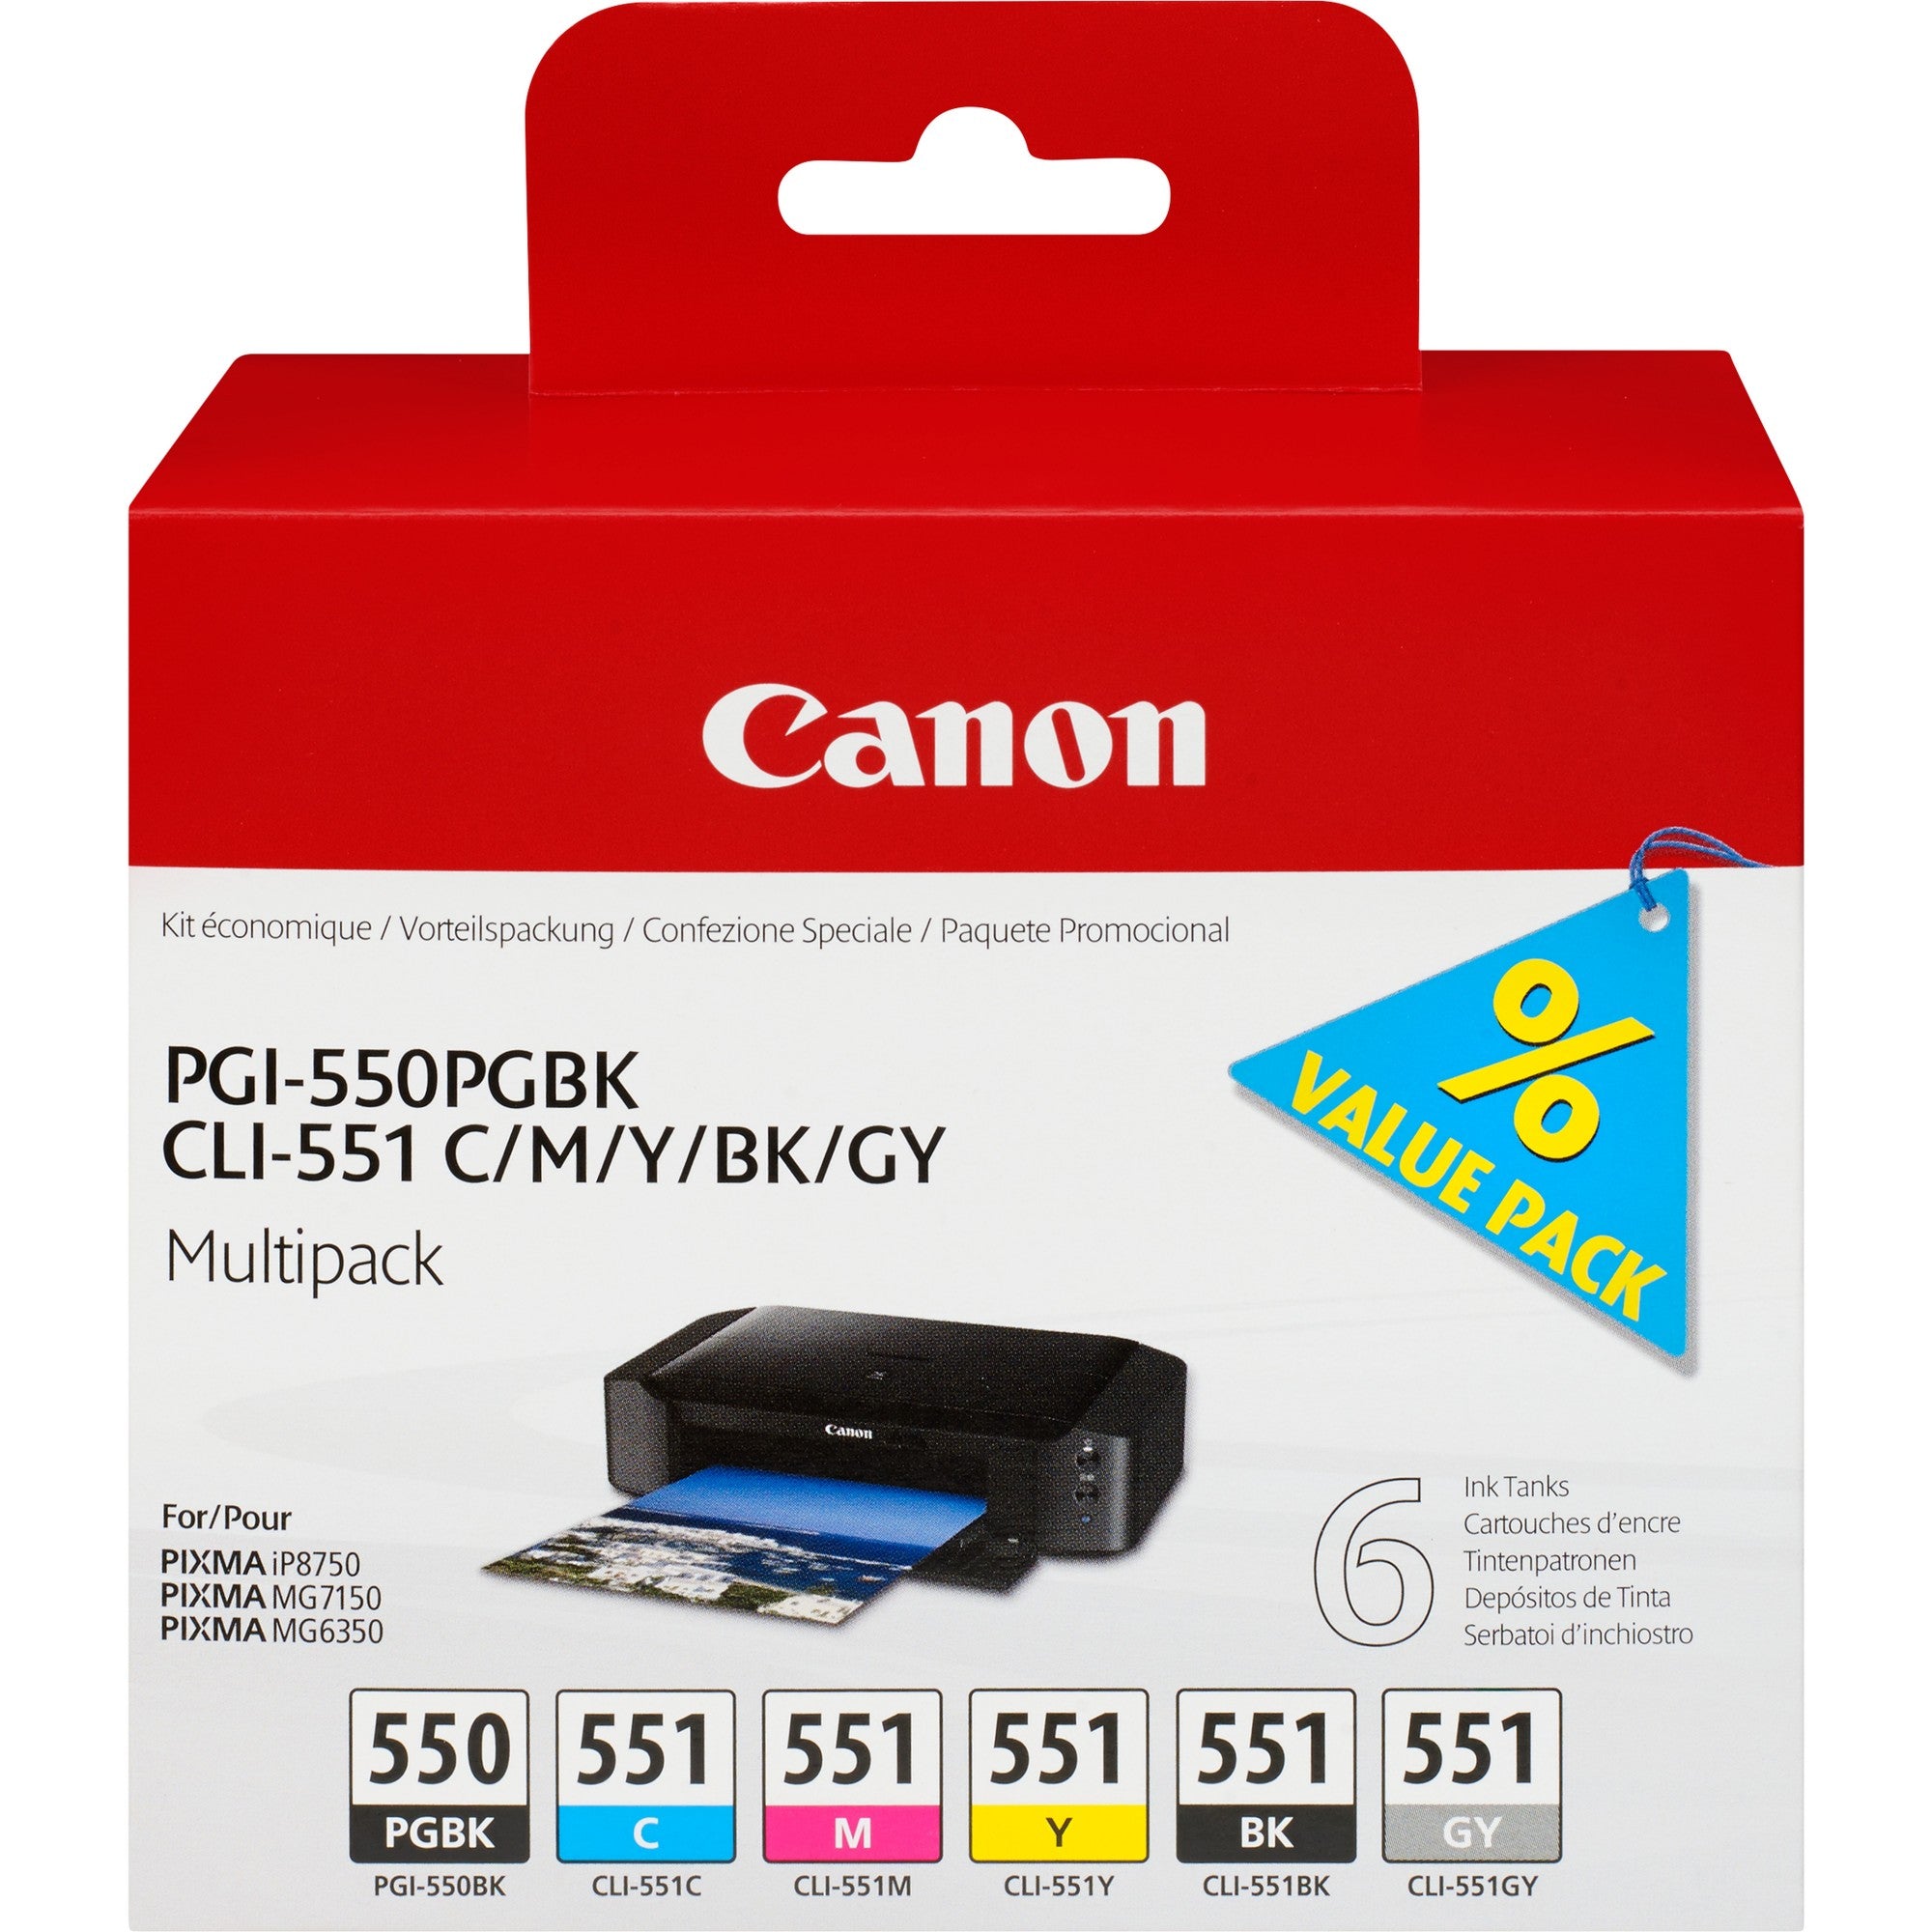 Canon 6496B005/PGI-550CLI-551 Ink cartridge multi pack Bk,C,M,Y,Gy 7ml Pack=6 for Canon Pixma IP 8700/MG 6350/MG 7550